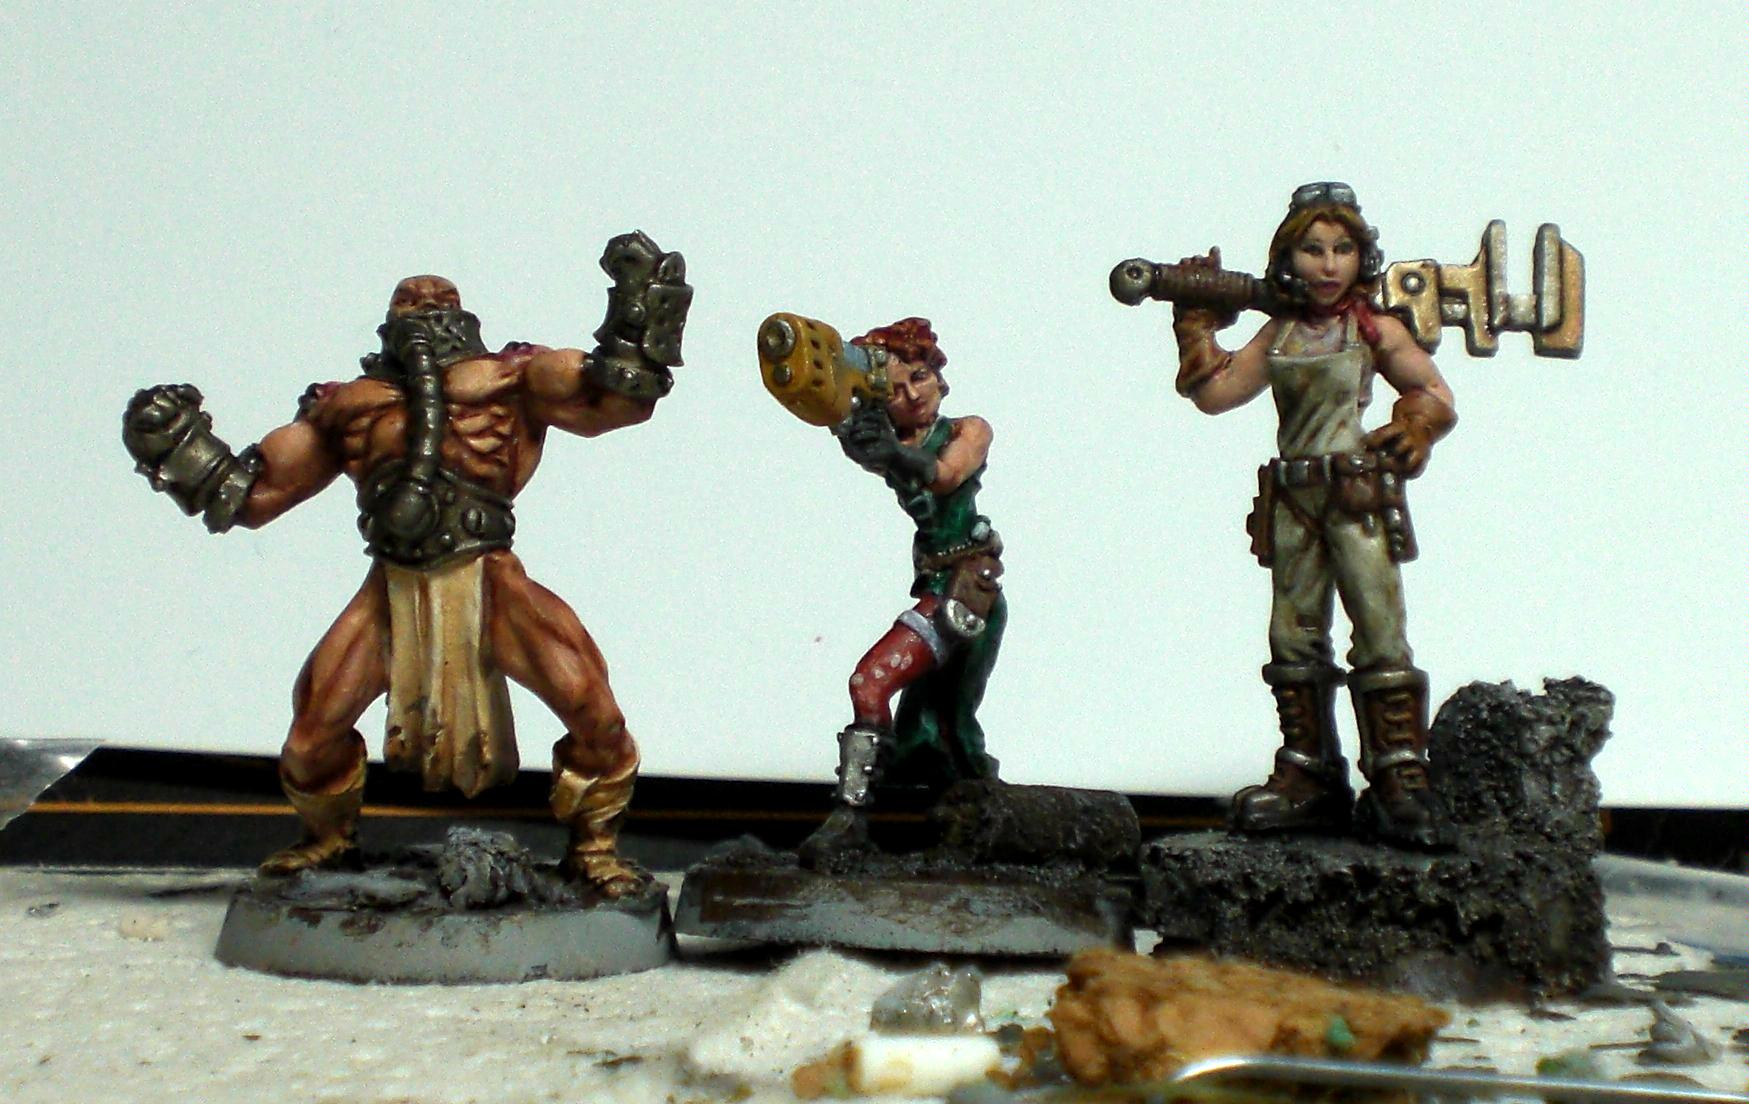 Armstrong, Dark Age, Hasslefree, Kaylie, Lucky, Necromunda, Privateer Press, Reaper